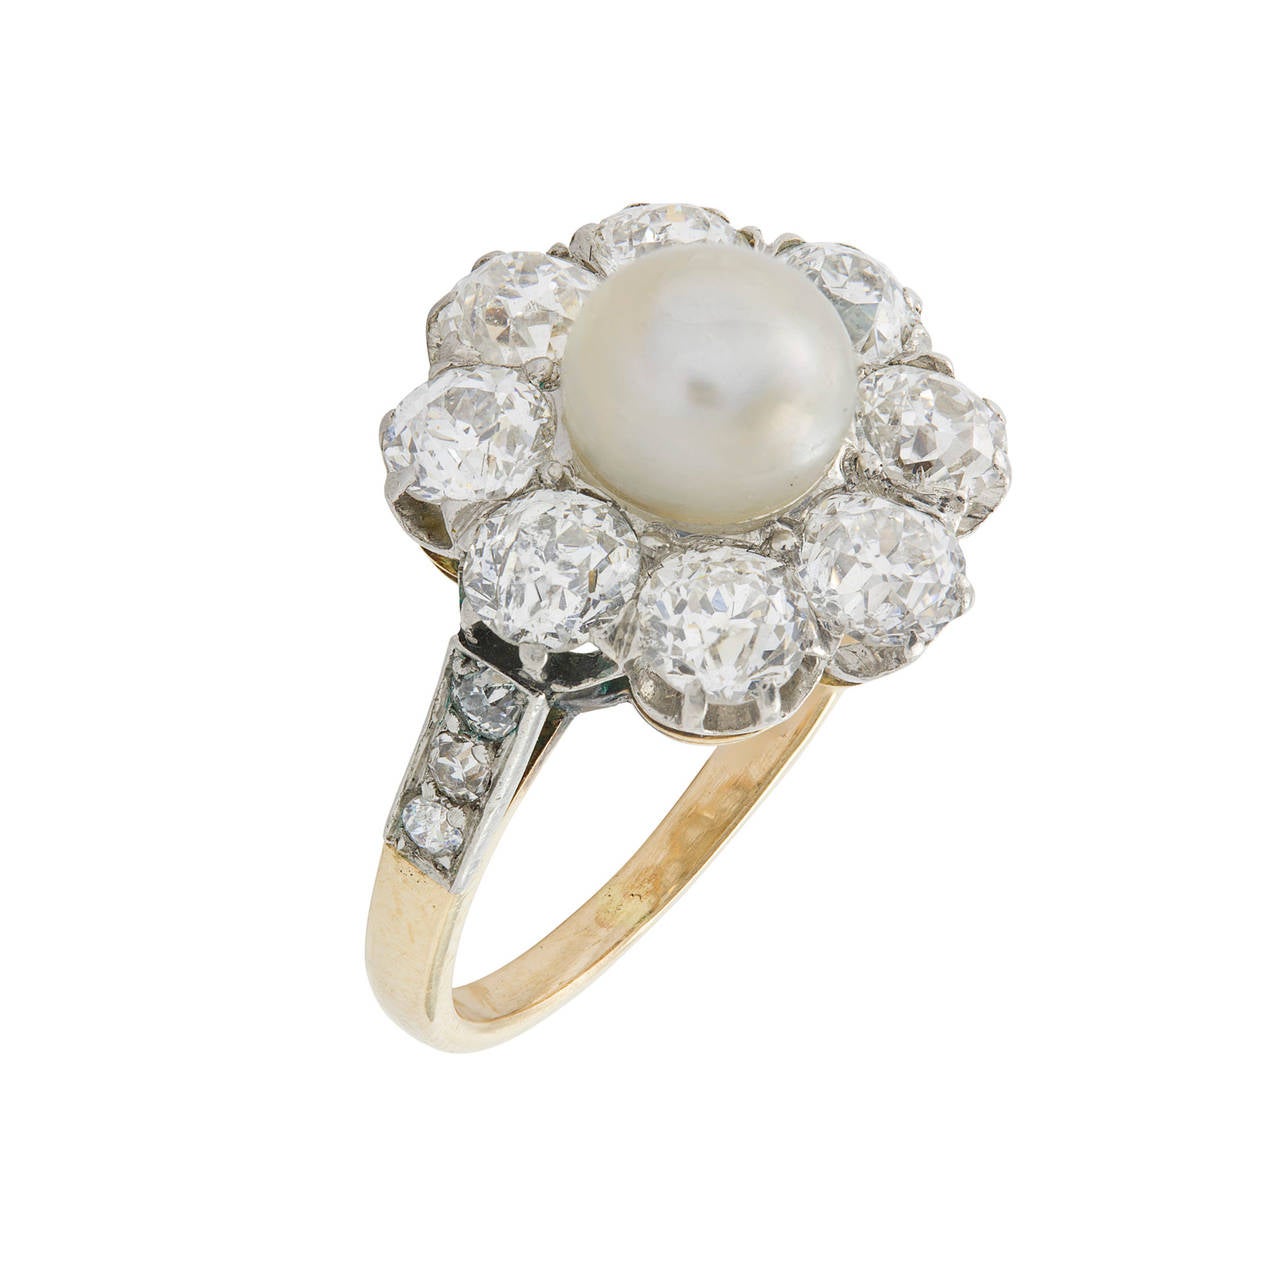 A Victorian pearl and diamond cluster ring, the central bouton pearl surrounded by eight old brilliant-cut diamonds estimated to weigh a total of 1.5 carats, claw-set in silver backed with yellow gold,  with diamond-set shoulders, circa 1880.